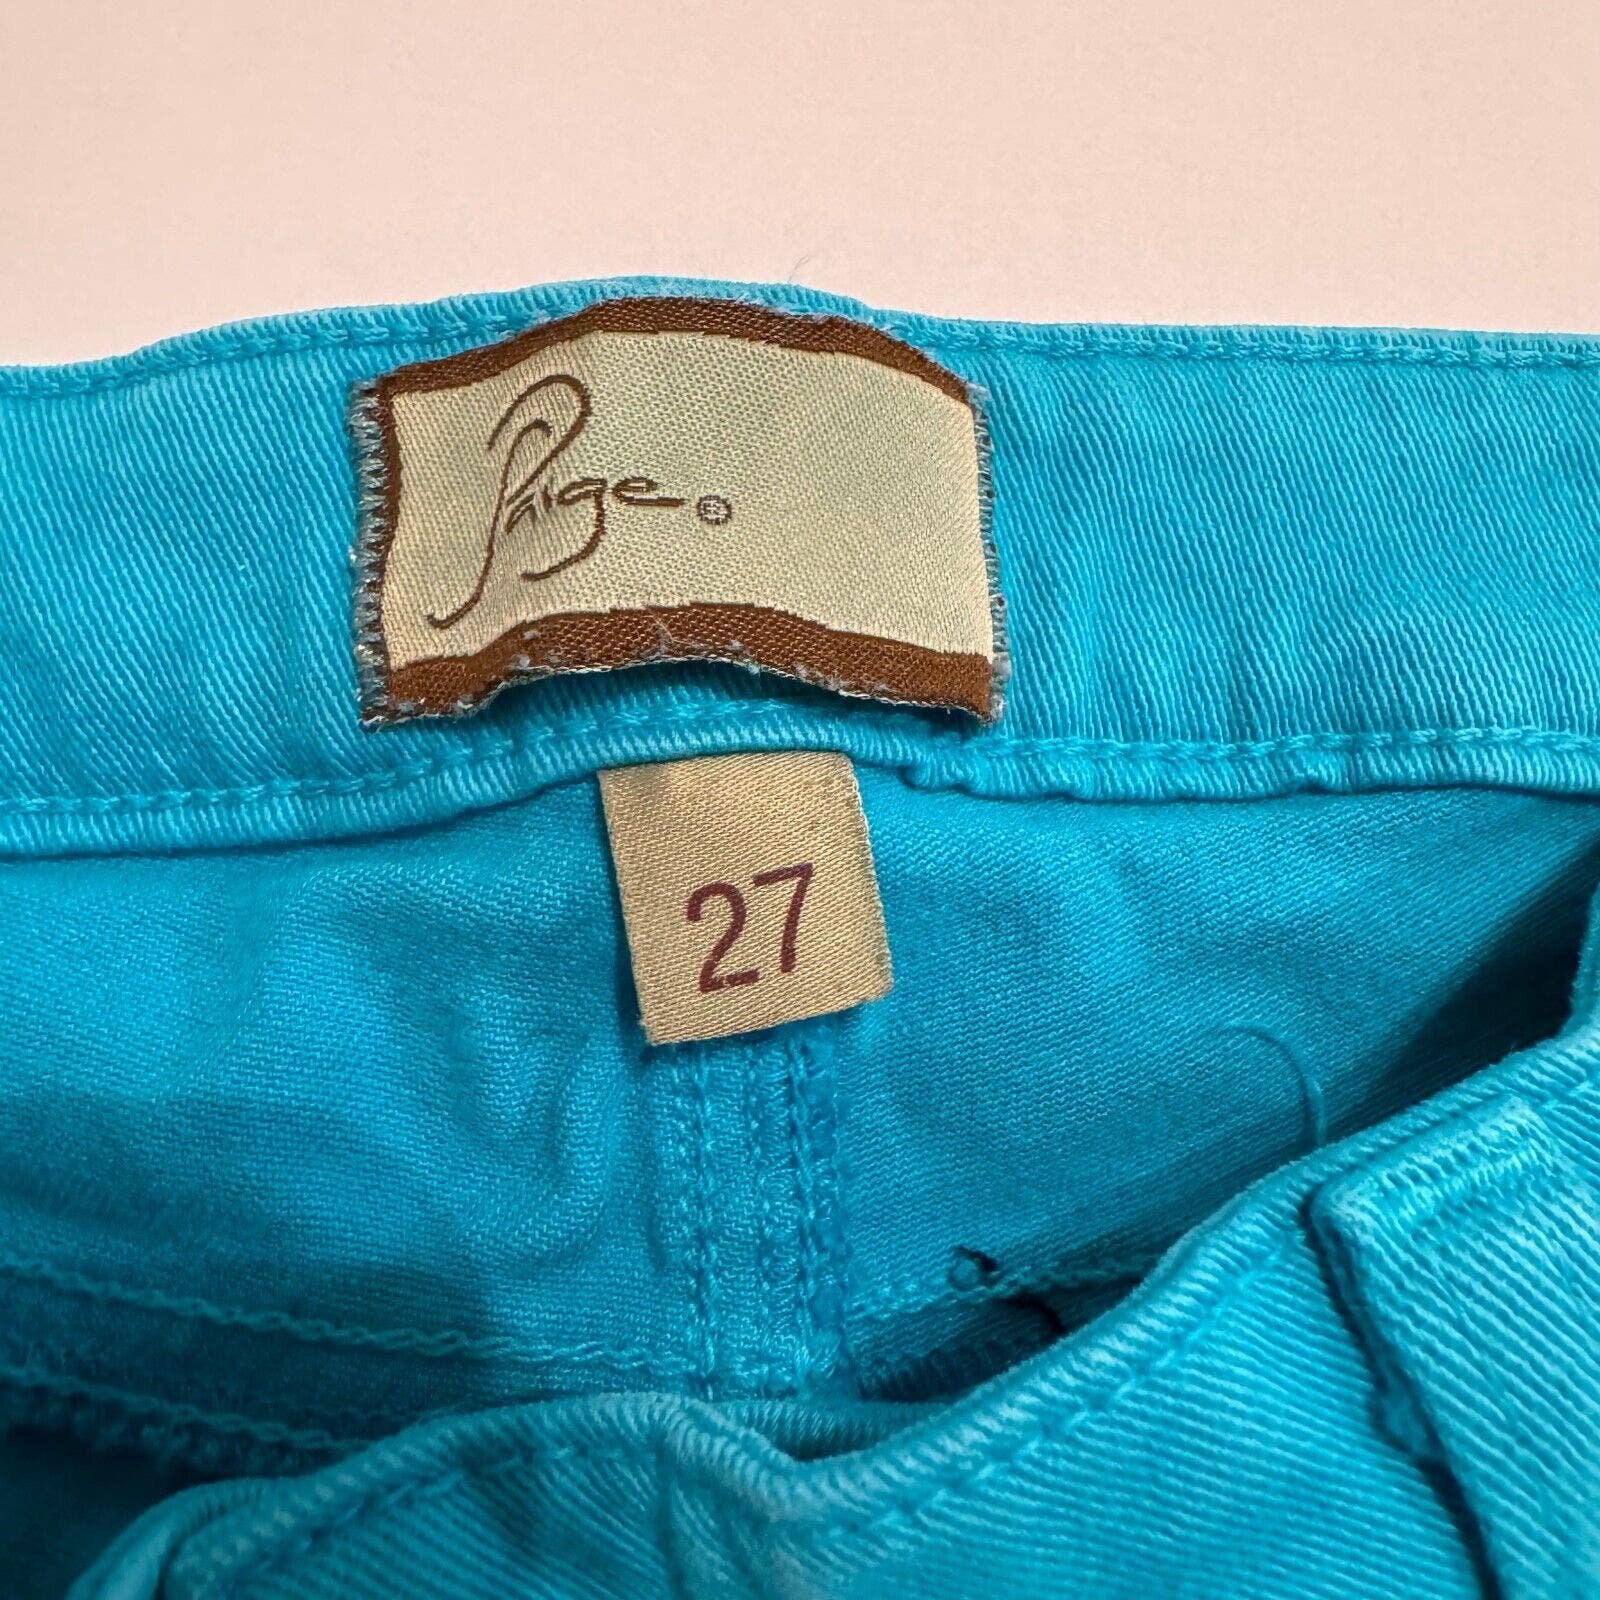 save up to 70% Paige Jeans Women´s 27 Roxie Capri Stretch Denim *Upside down label* Turquoise IvwF7MH8E Great